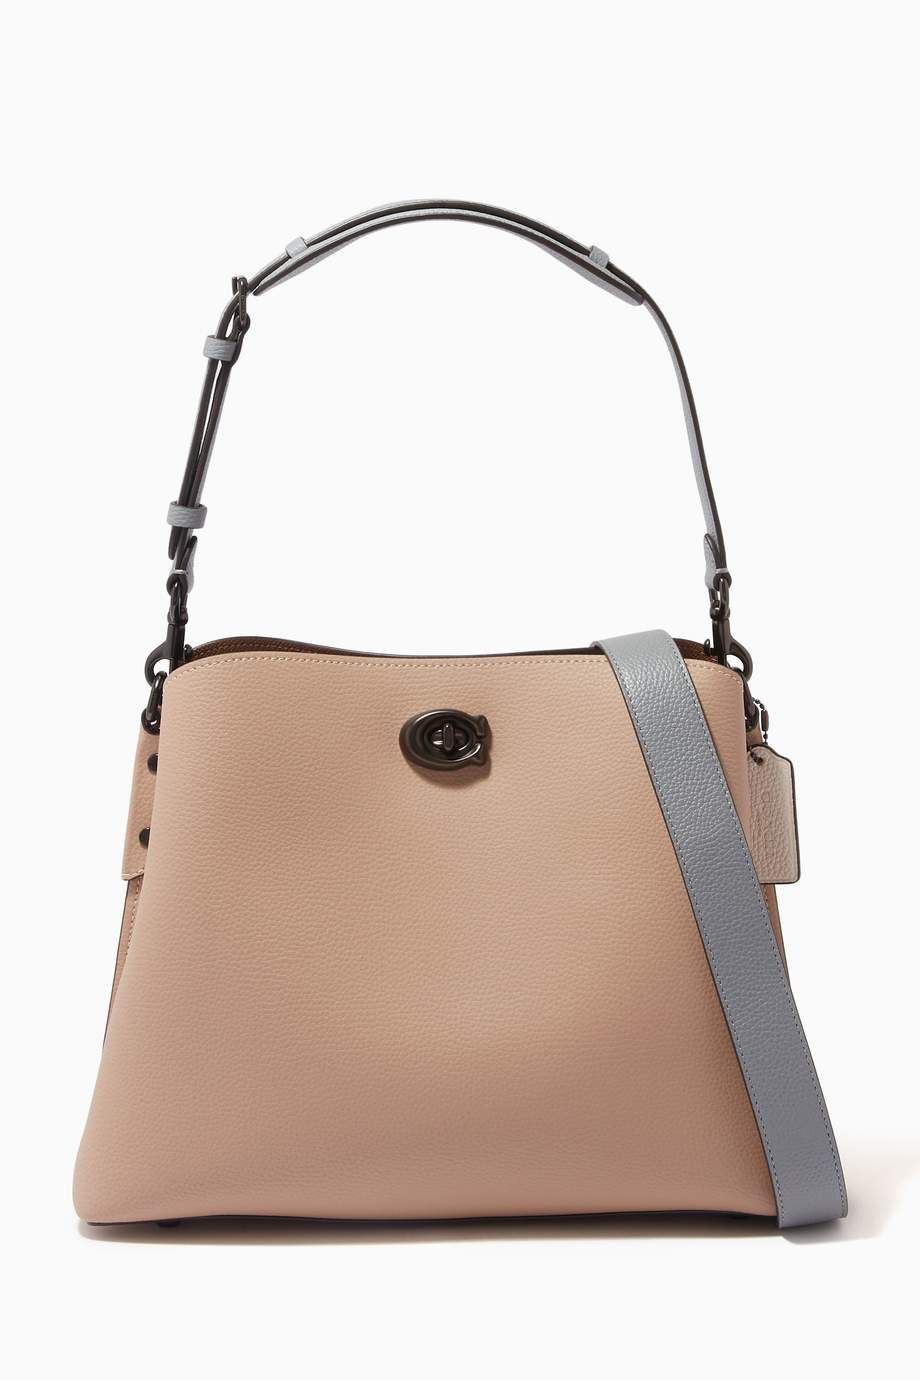 Shop Coach Brown Willow Shoulder Bag in Pebble Leather for Women | Ounass UAE